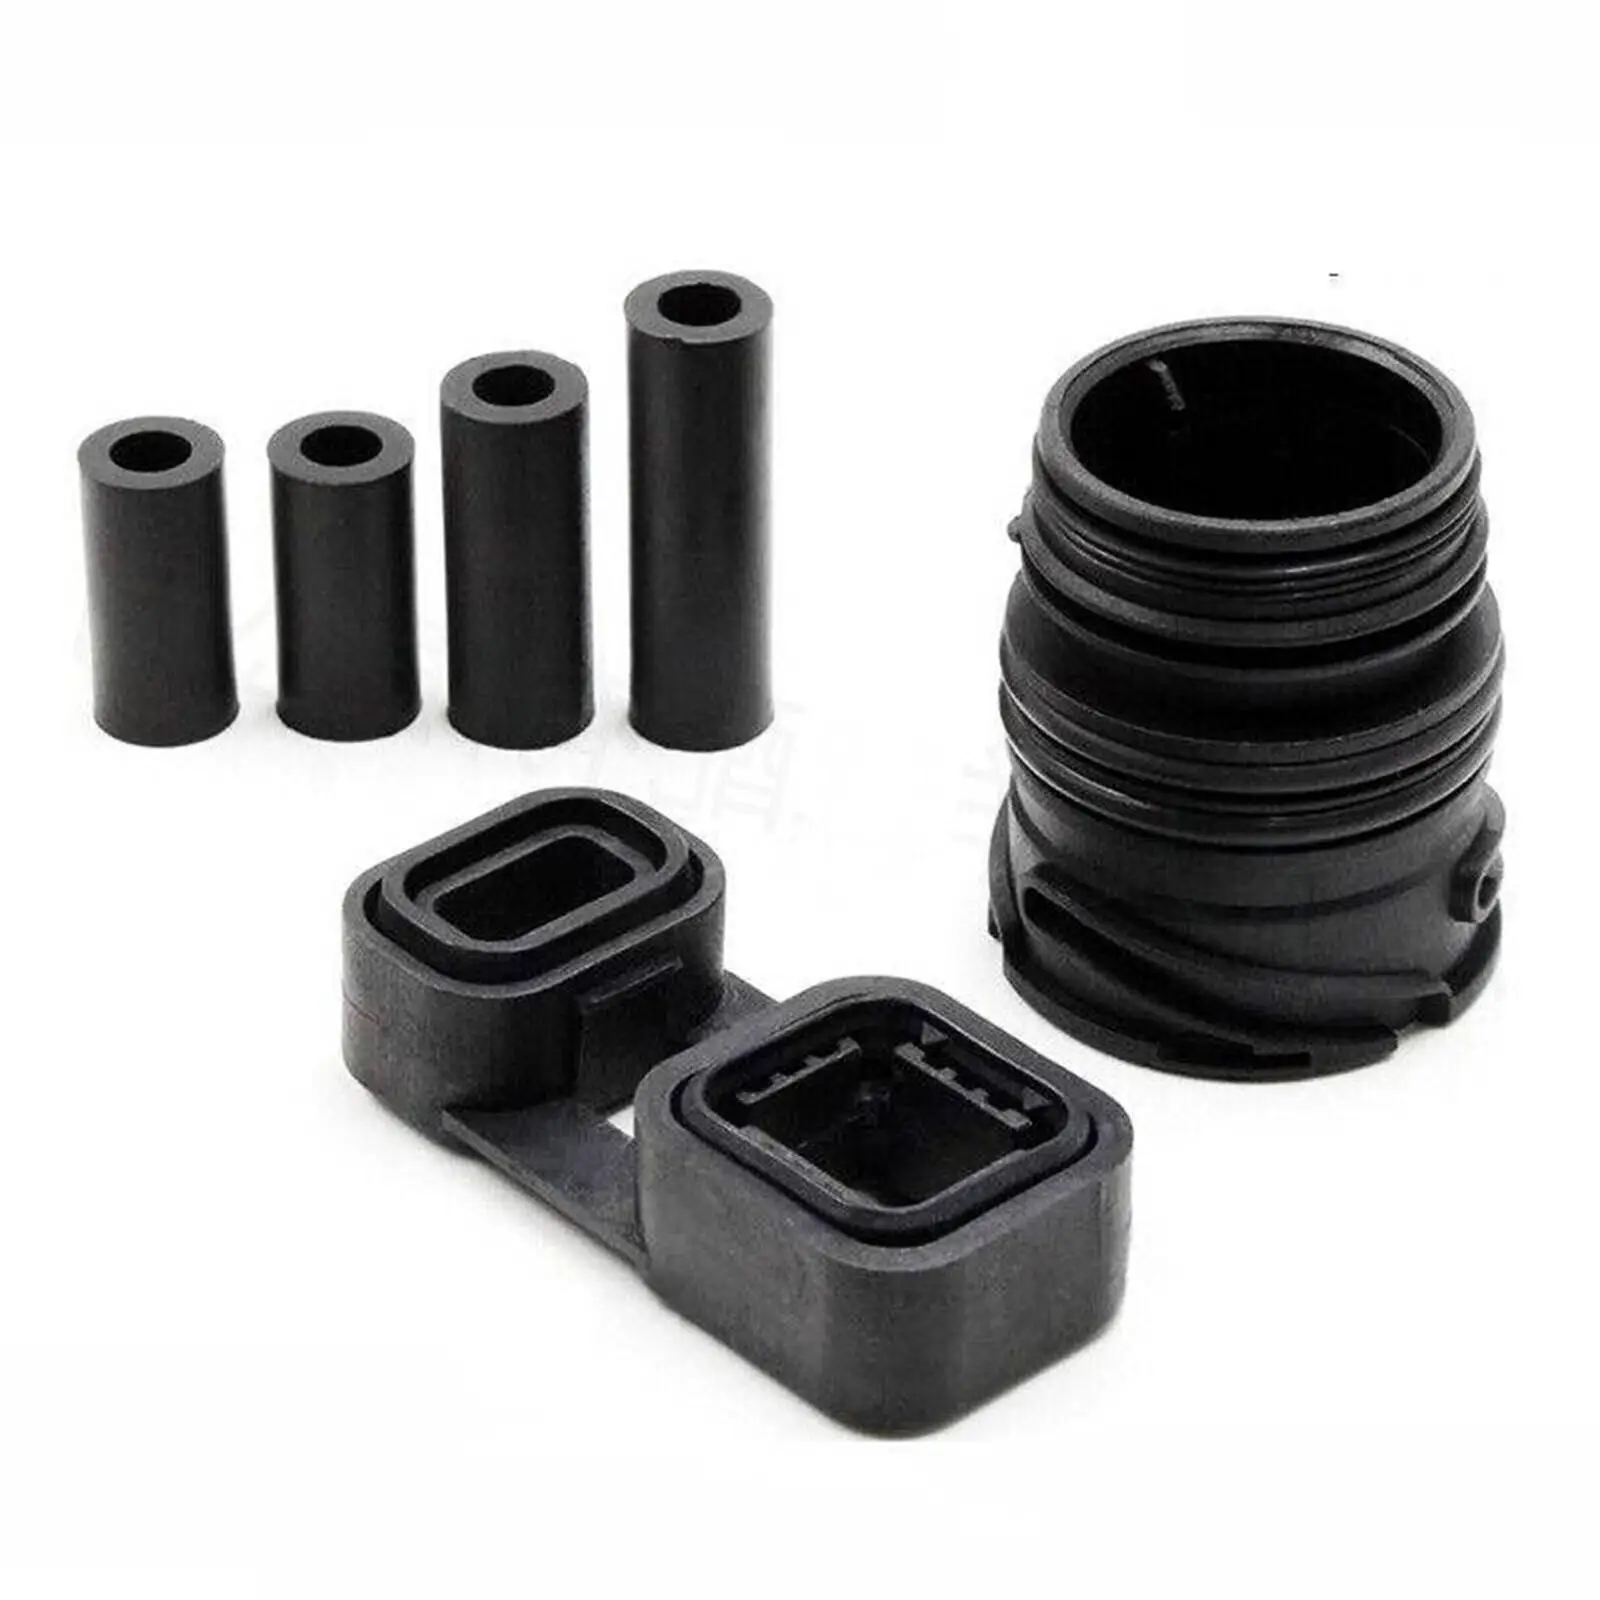 Valve Body Adapter Seal Kit Car Accessories for BMW 1 Series x1, x3, x5, Z4, Zf Models with 6 Speed Zf 6HP26 3 Series 6HP28